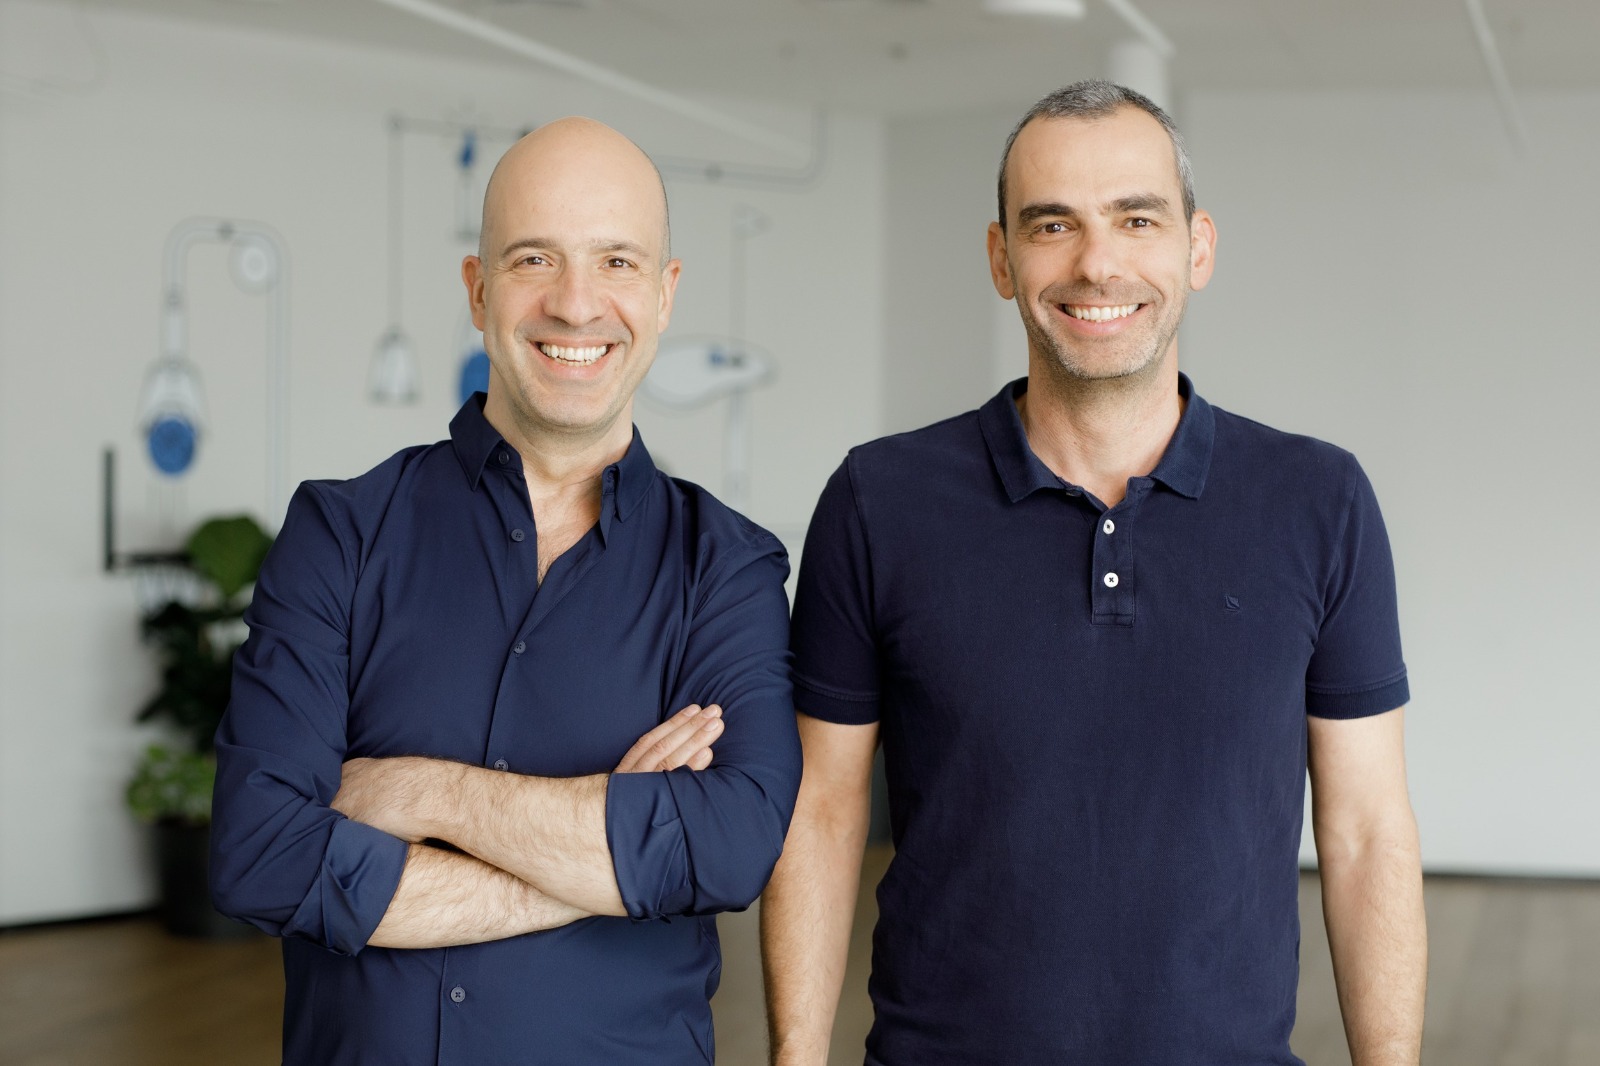 This Israeli company announces a fundraising of 21 million dollars